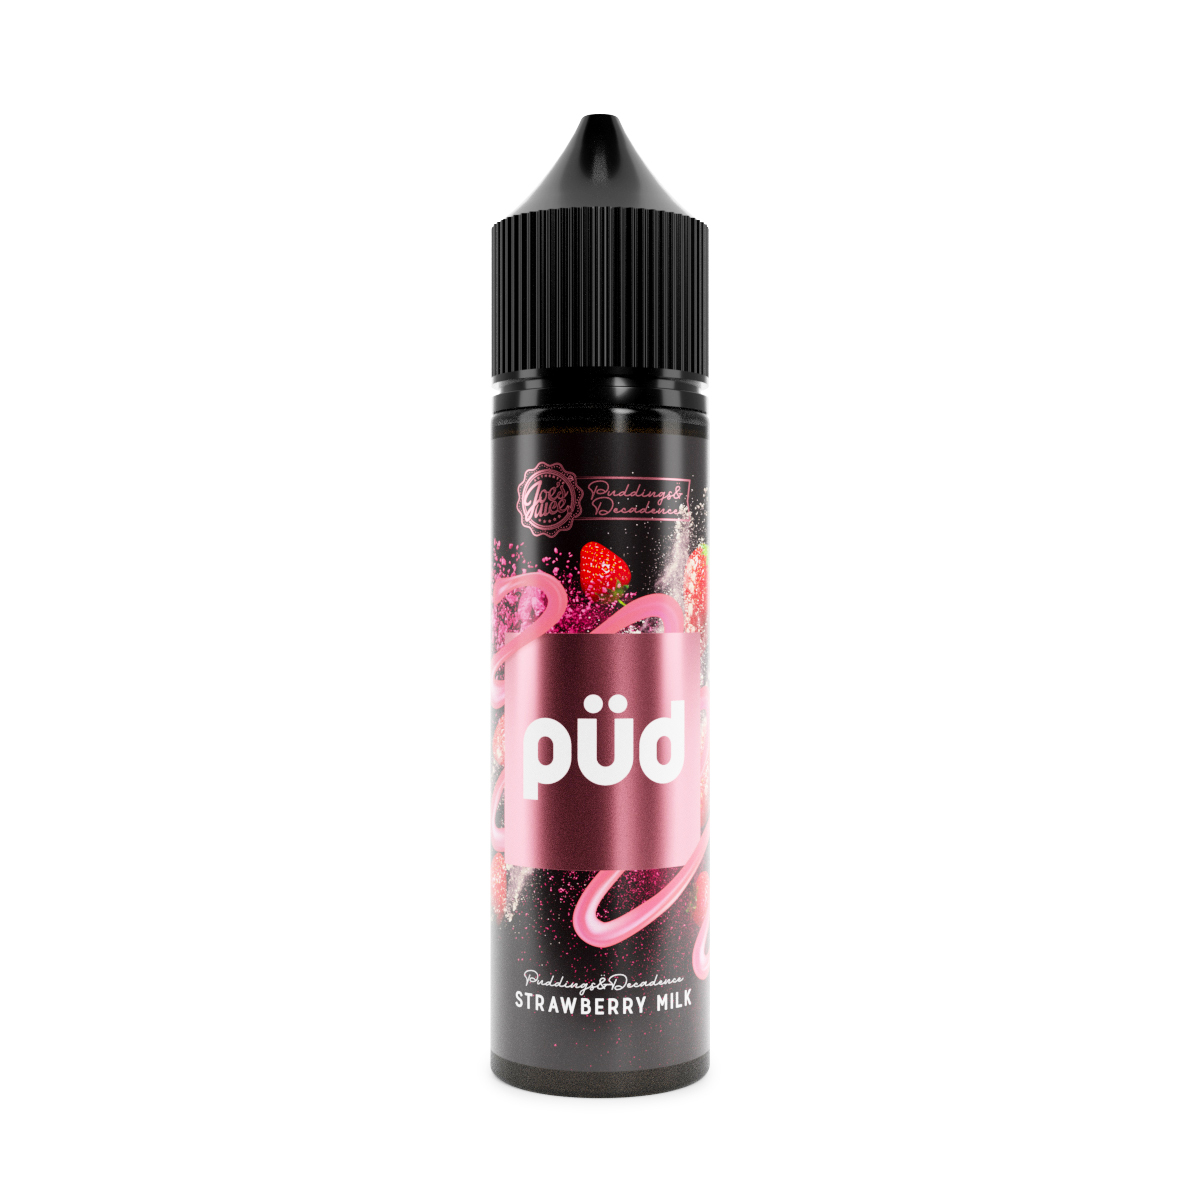 PUD - Strawberry Milk Flavour Concentrate by Joe's Juice